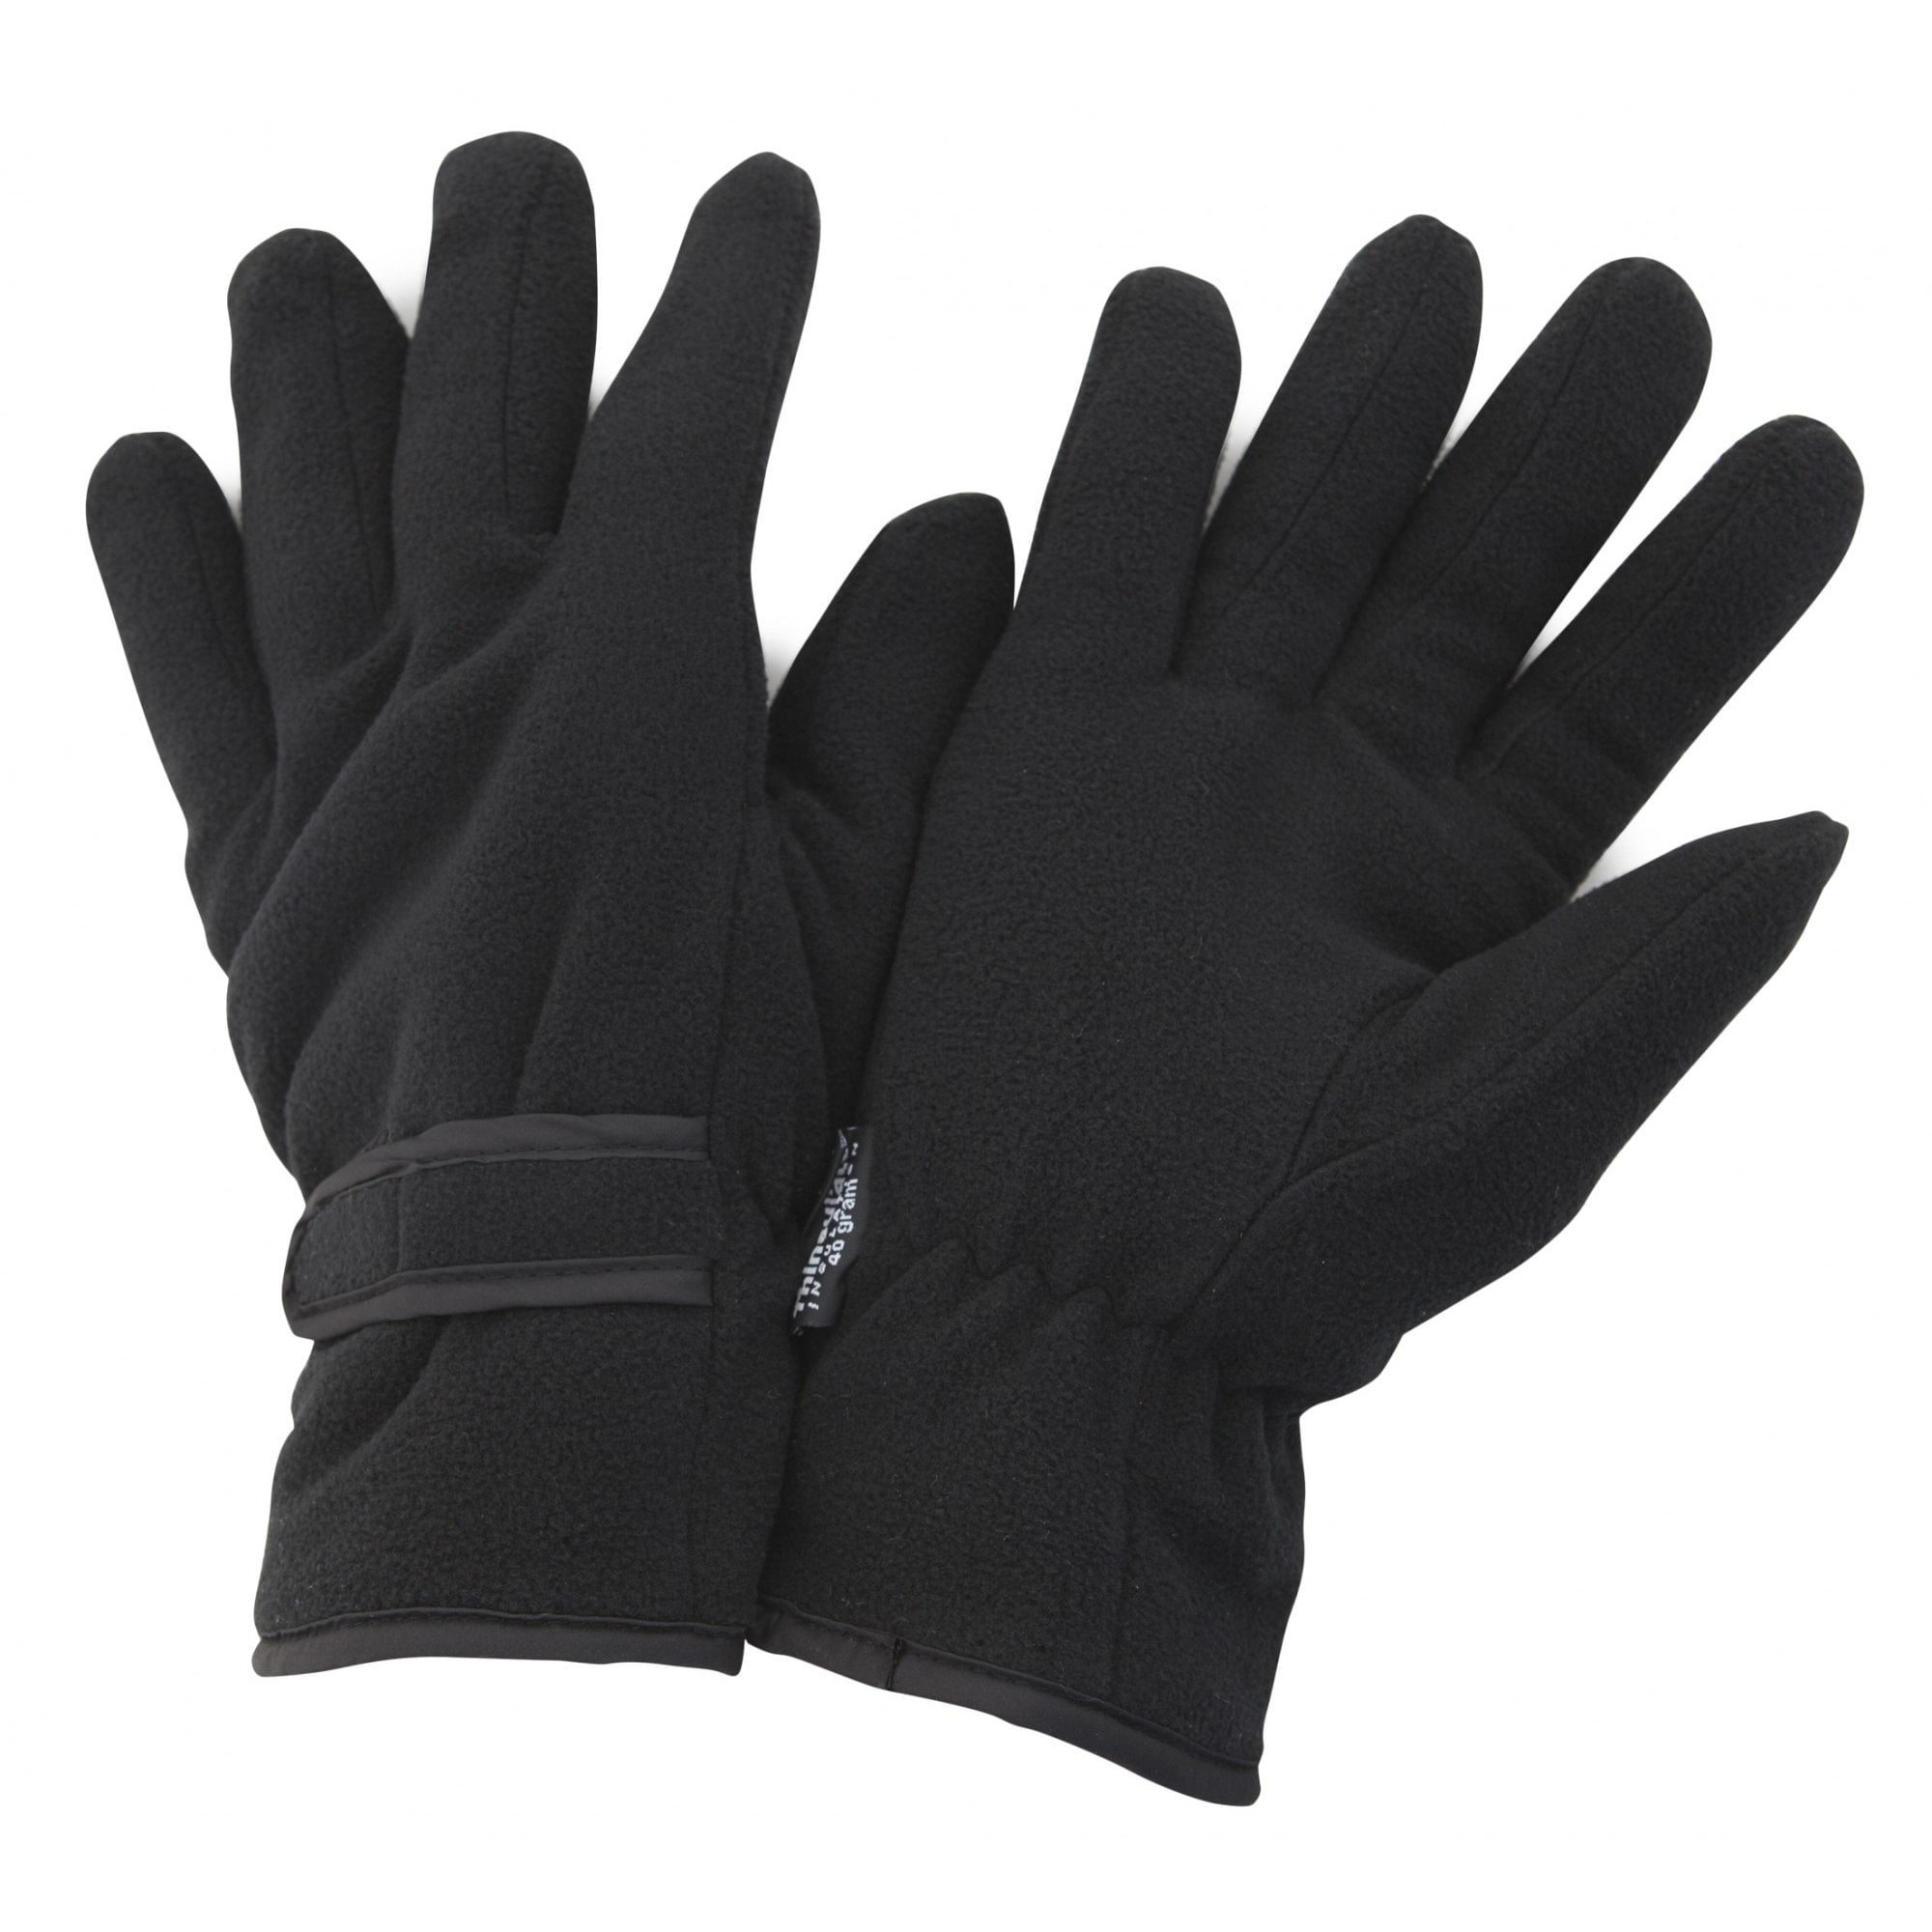 FLOSO Mens Thinsulate Winter Warm Thermal Fleece Gloves GL138 3M 40g 